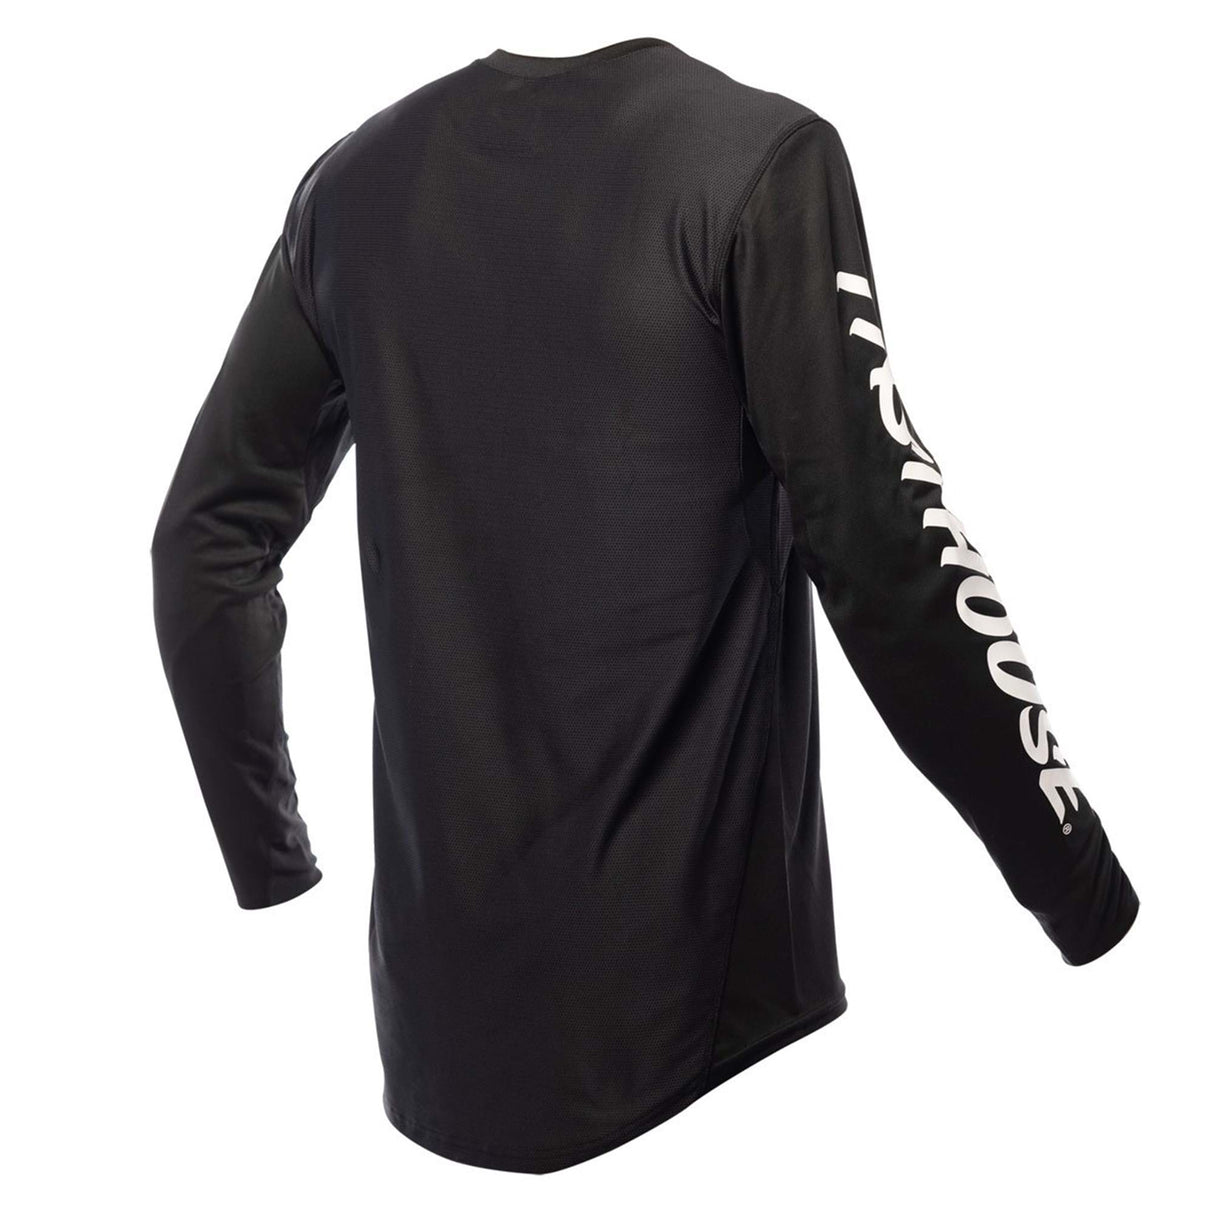 Fasthouse Elrod Long Sleeve Jersey